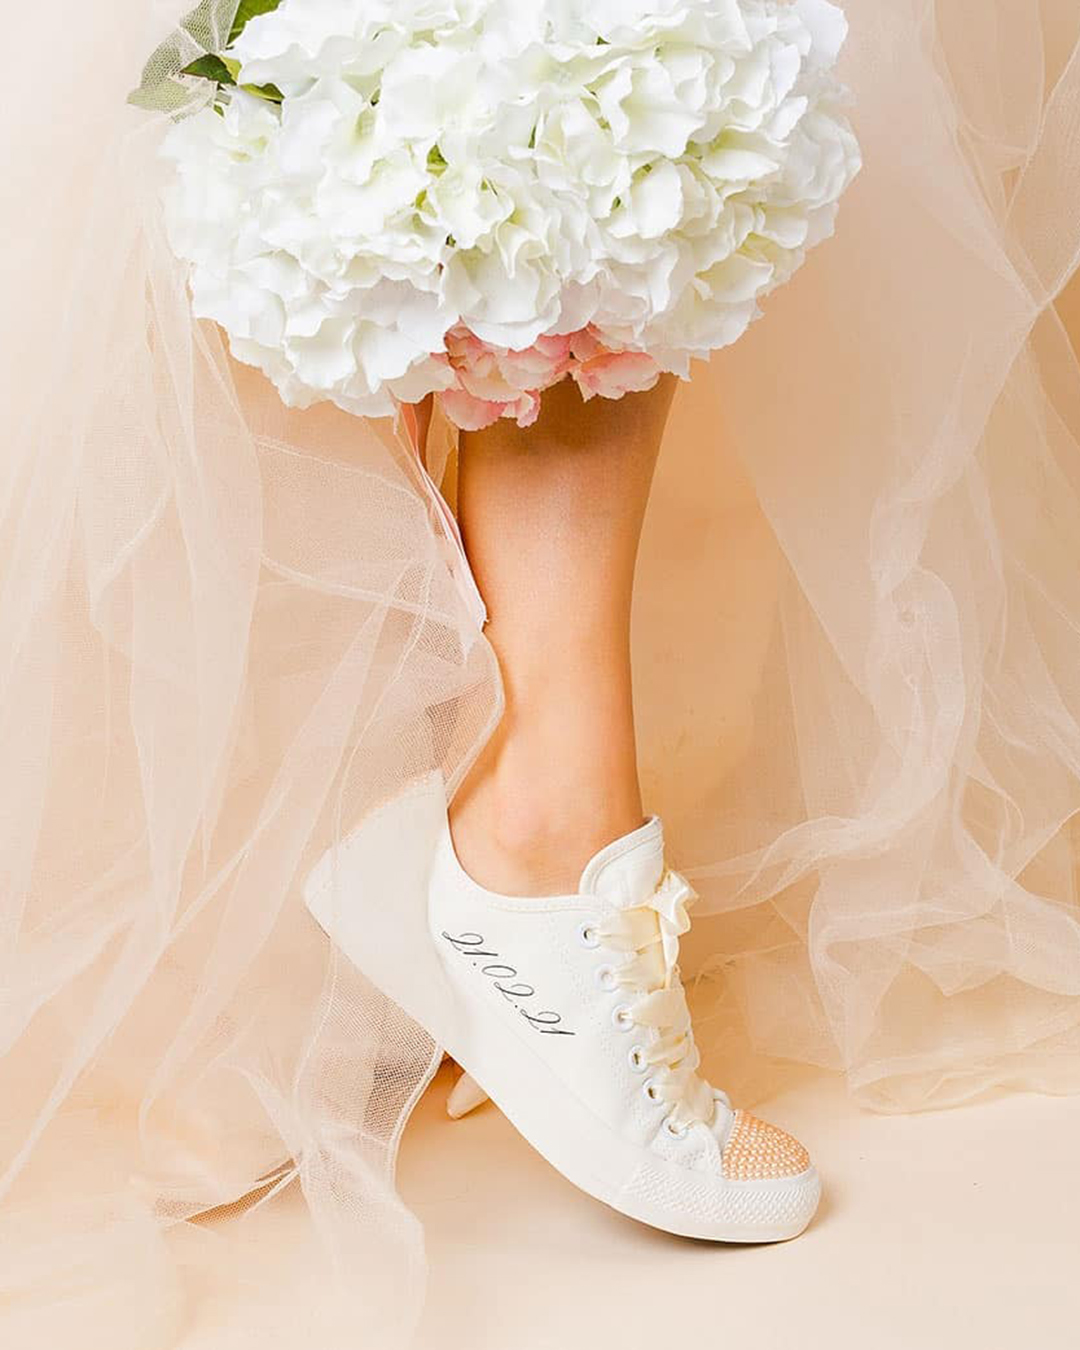 non traditional wedding shoes white with signature wedding_converse